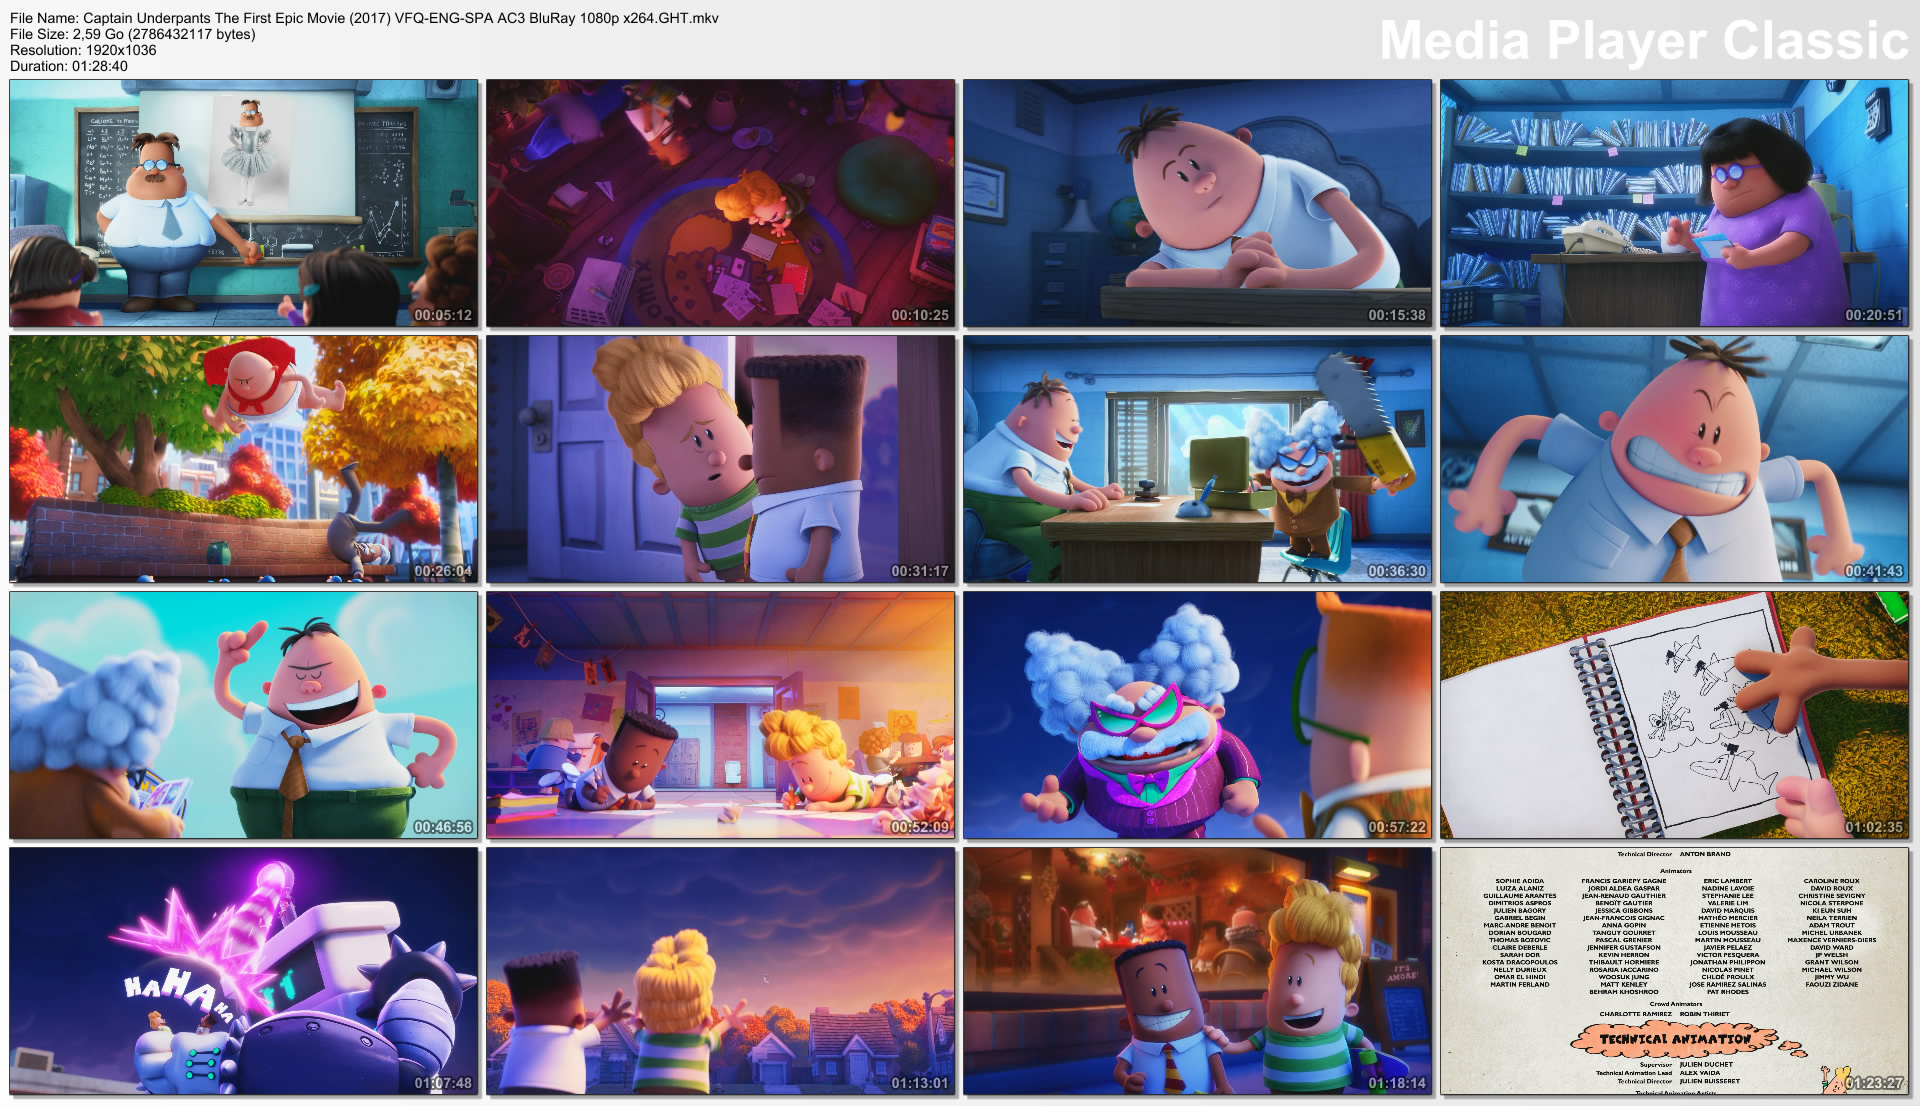 Captain Underpants The First Epic Movie (2017) VFQ-ENG-SPA AC3 BluRay 1080p x264.GHT